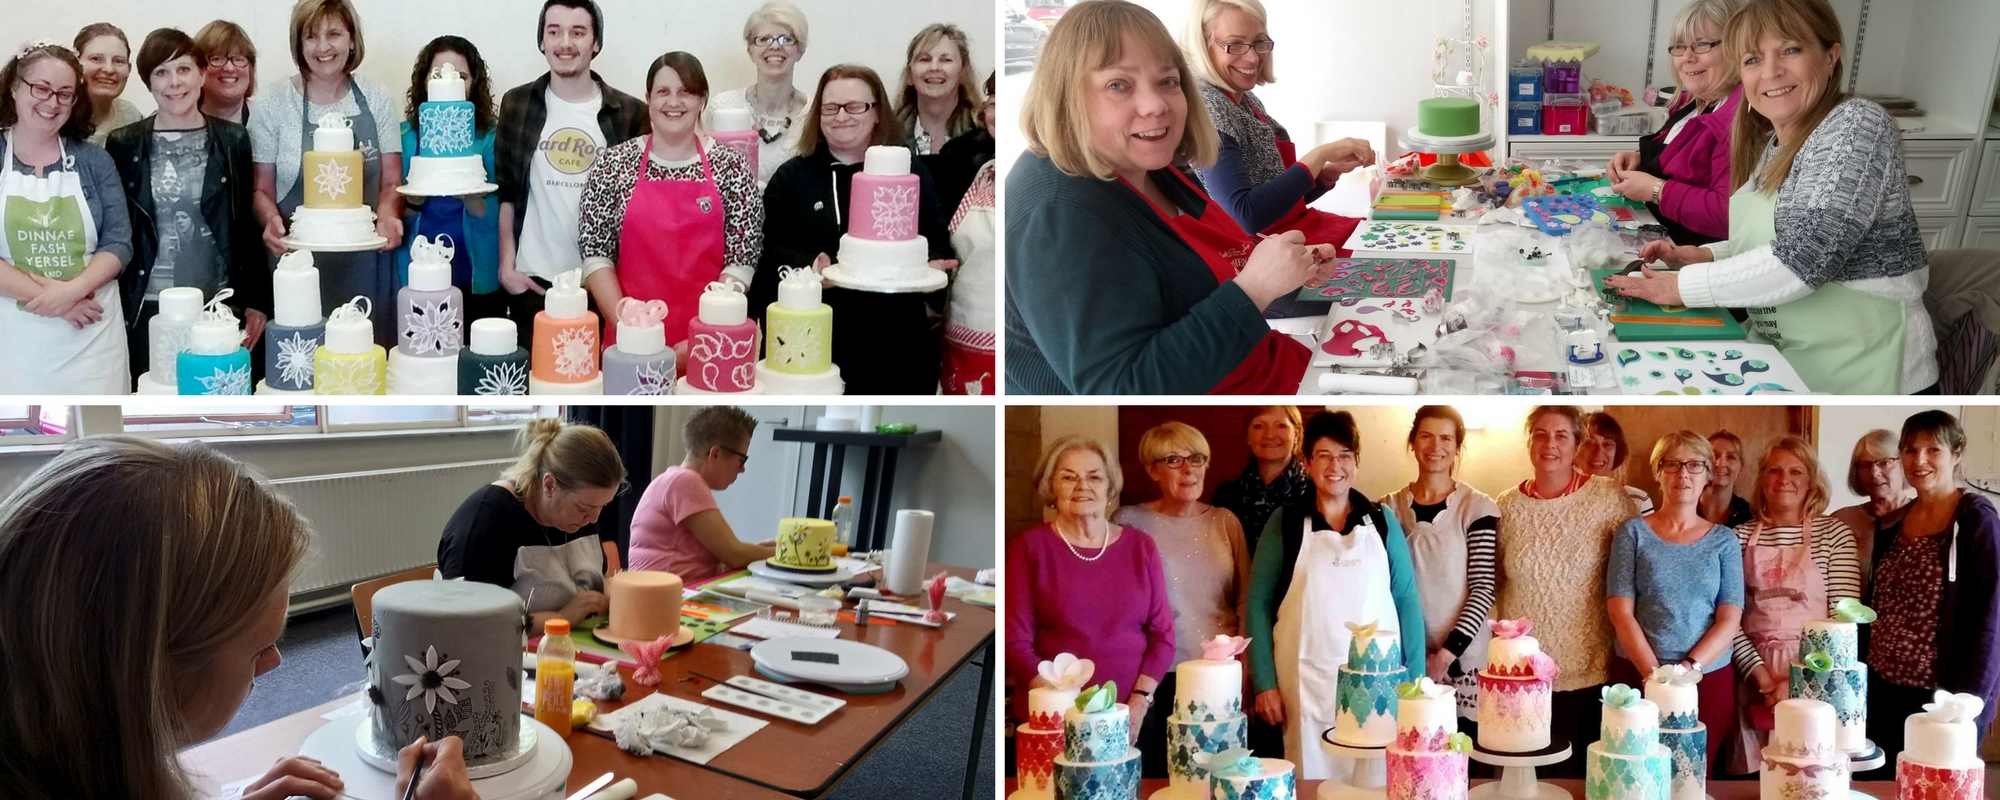 Cake decorating and sugarcraft classes for groups and organisations by cake decorating expert Lindy Smith